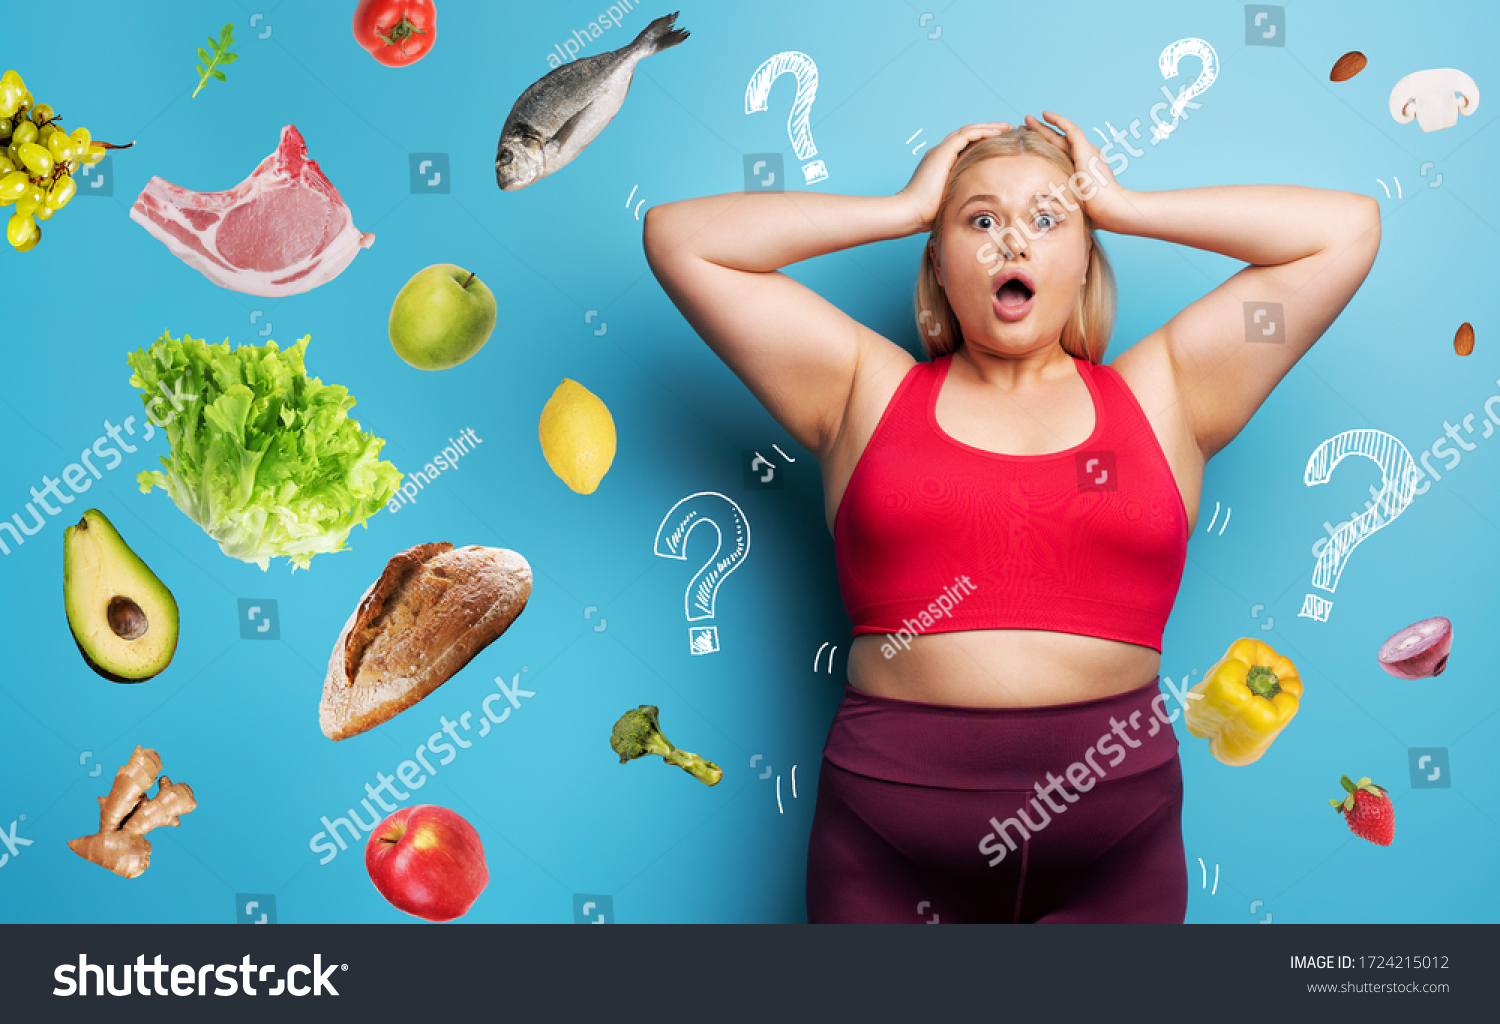 Fat girl in fitness suite wants to start a diet but has doubts about the food to buy. Cyan background #1724215012